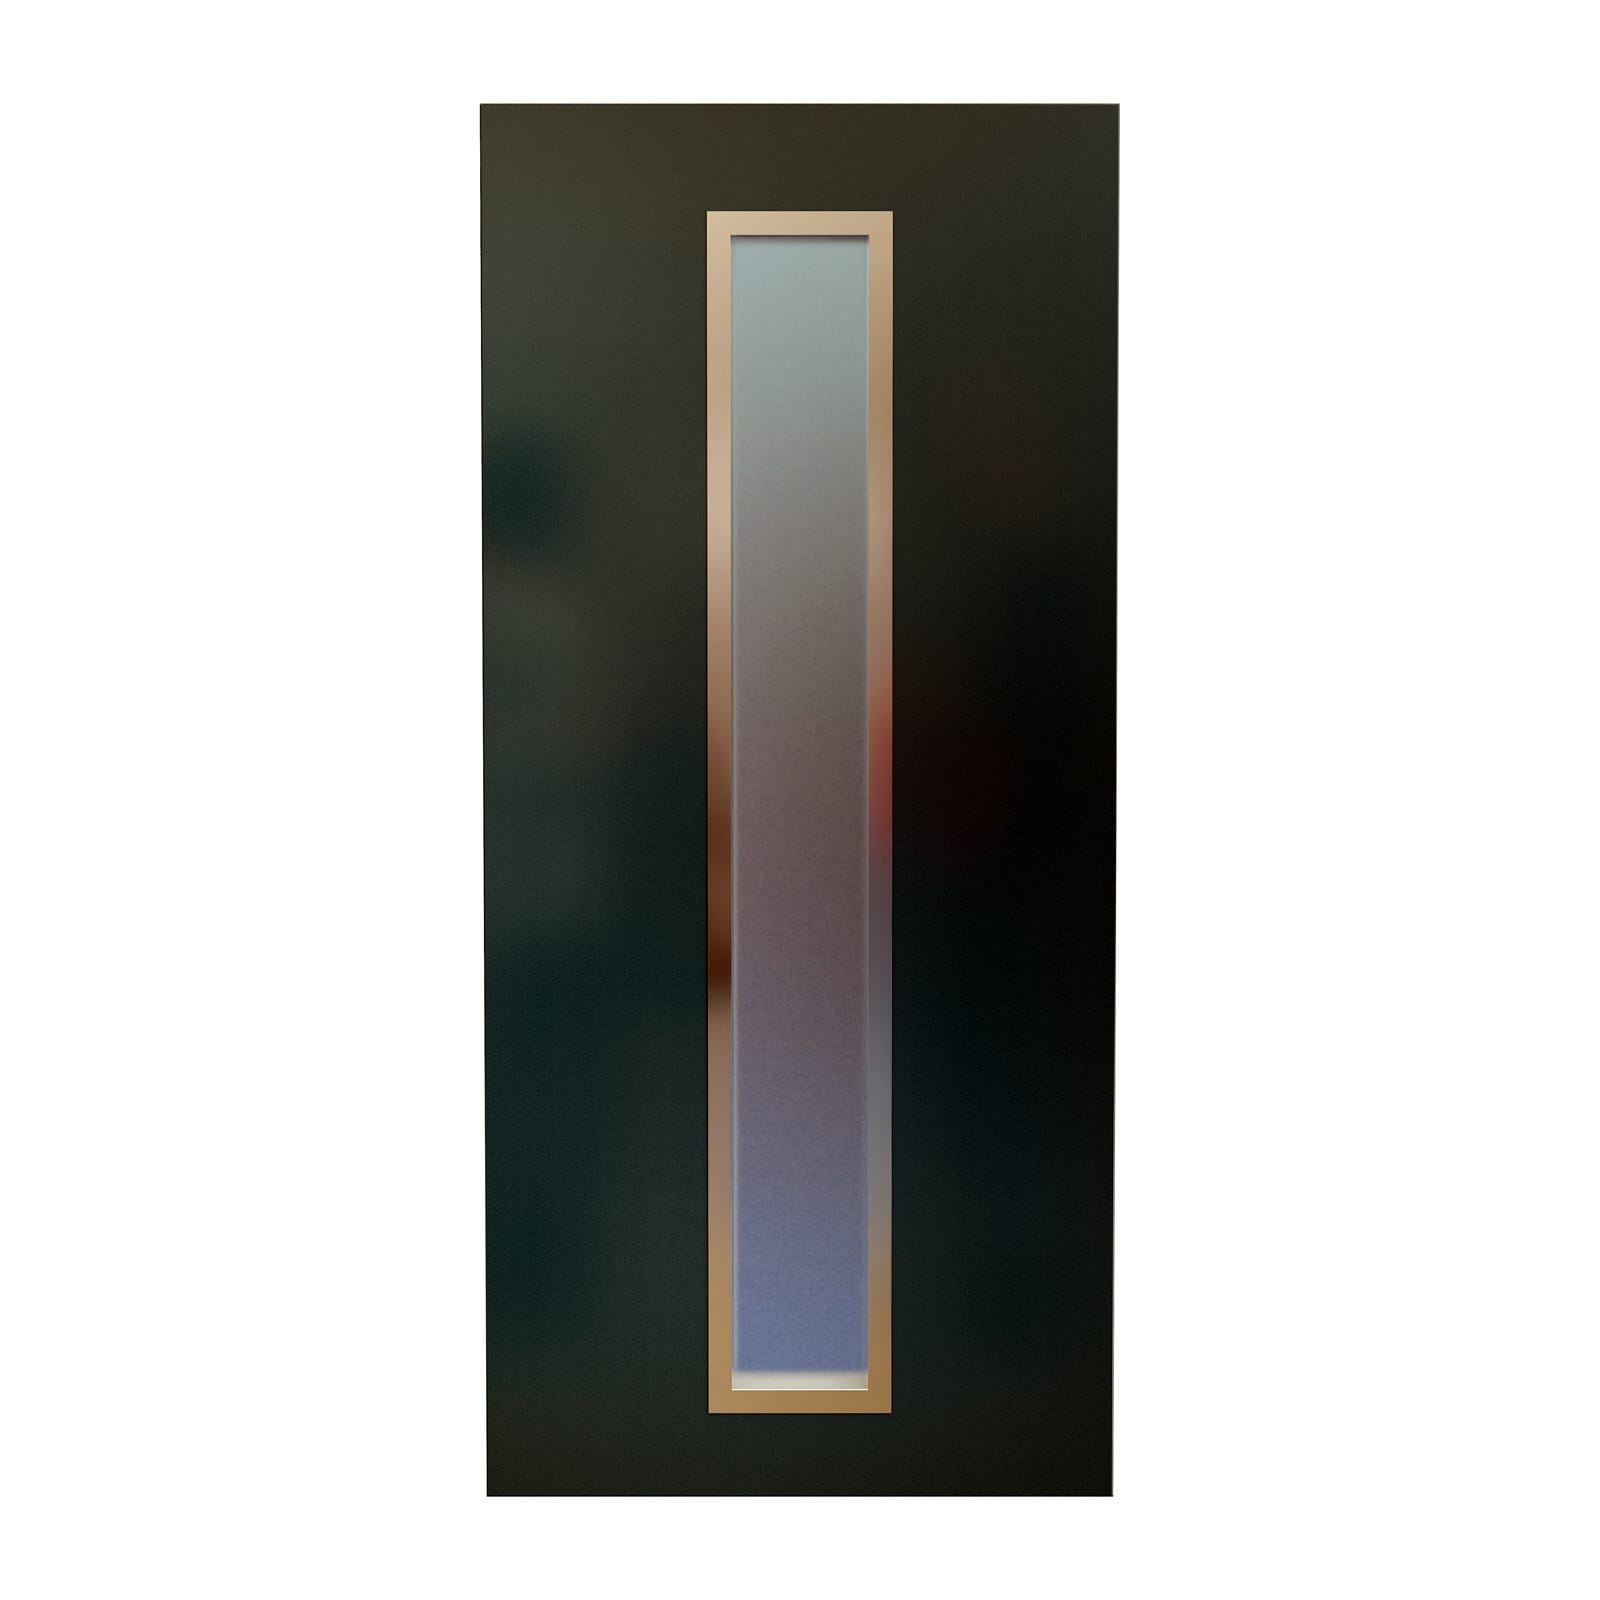 Alitherm 400 Door with PM0005T panel